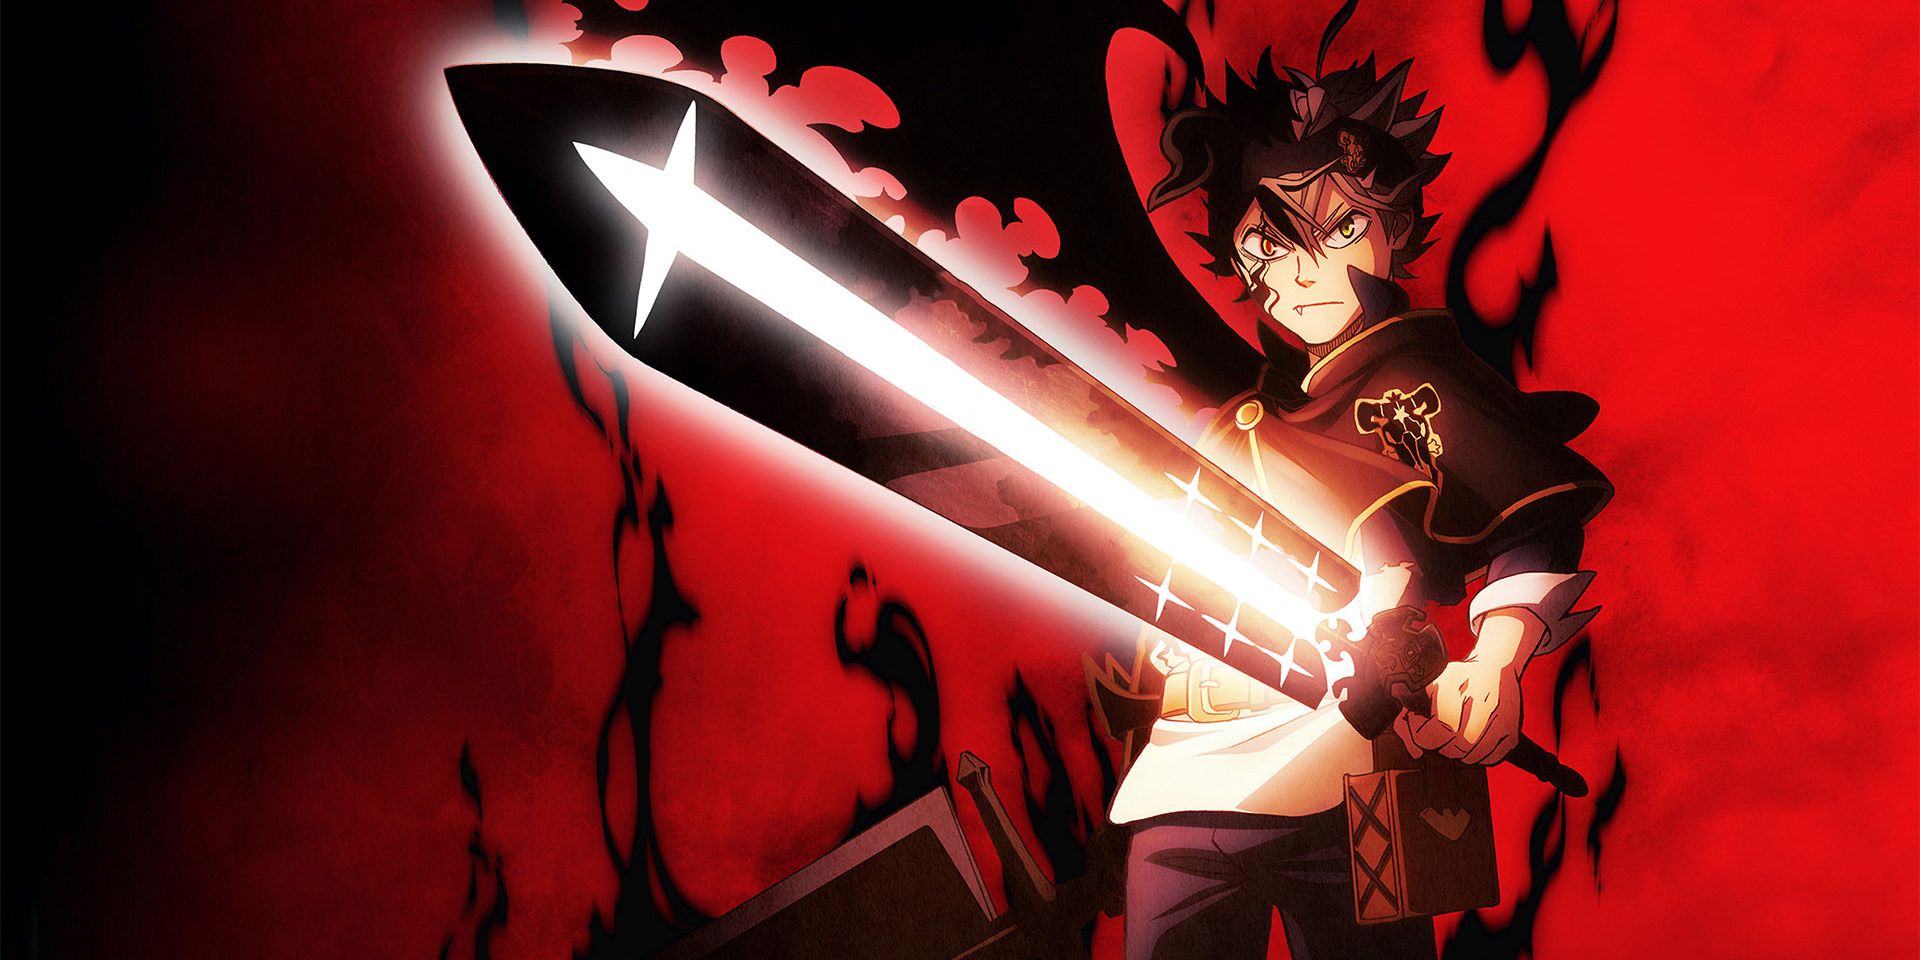 Black Clover's Asta wielding a heavy sword in front of an inky black and red background